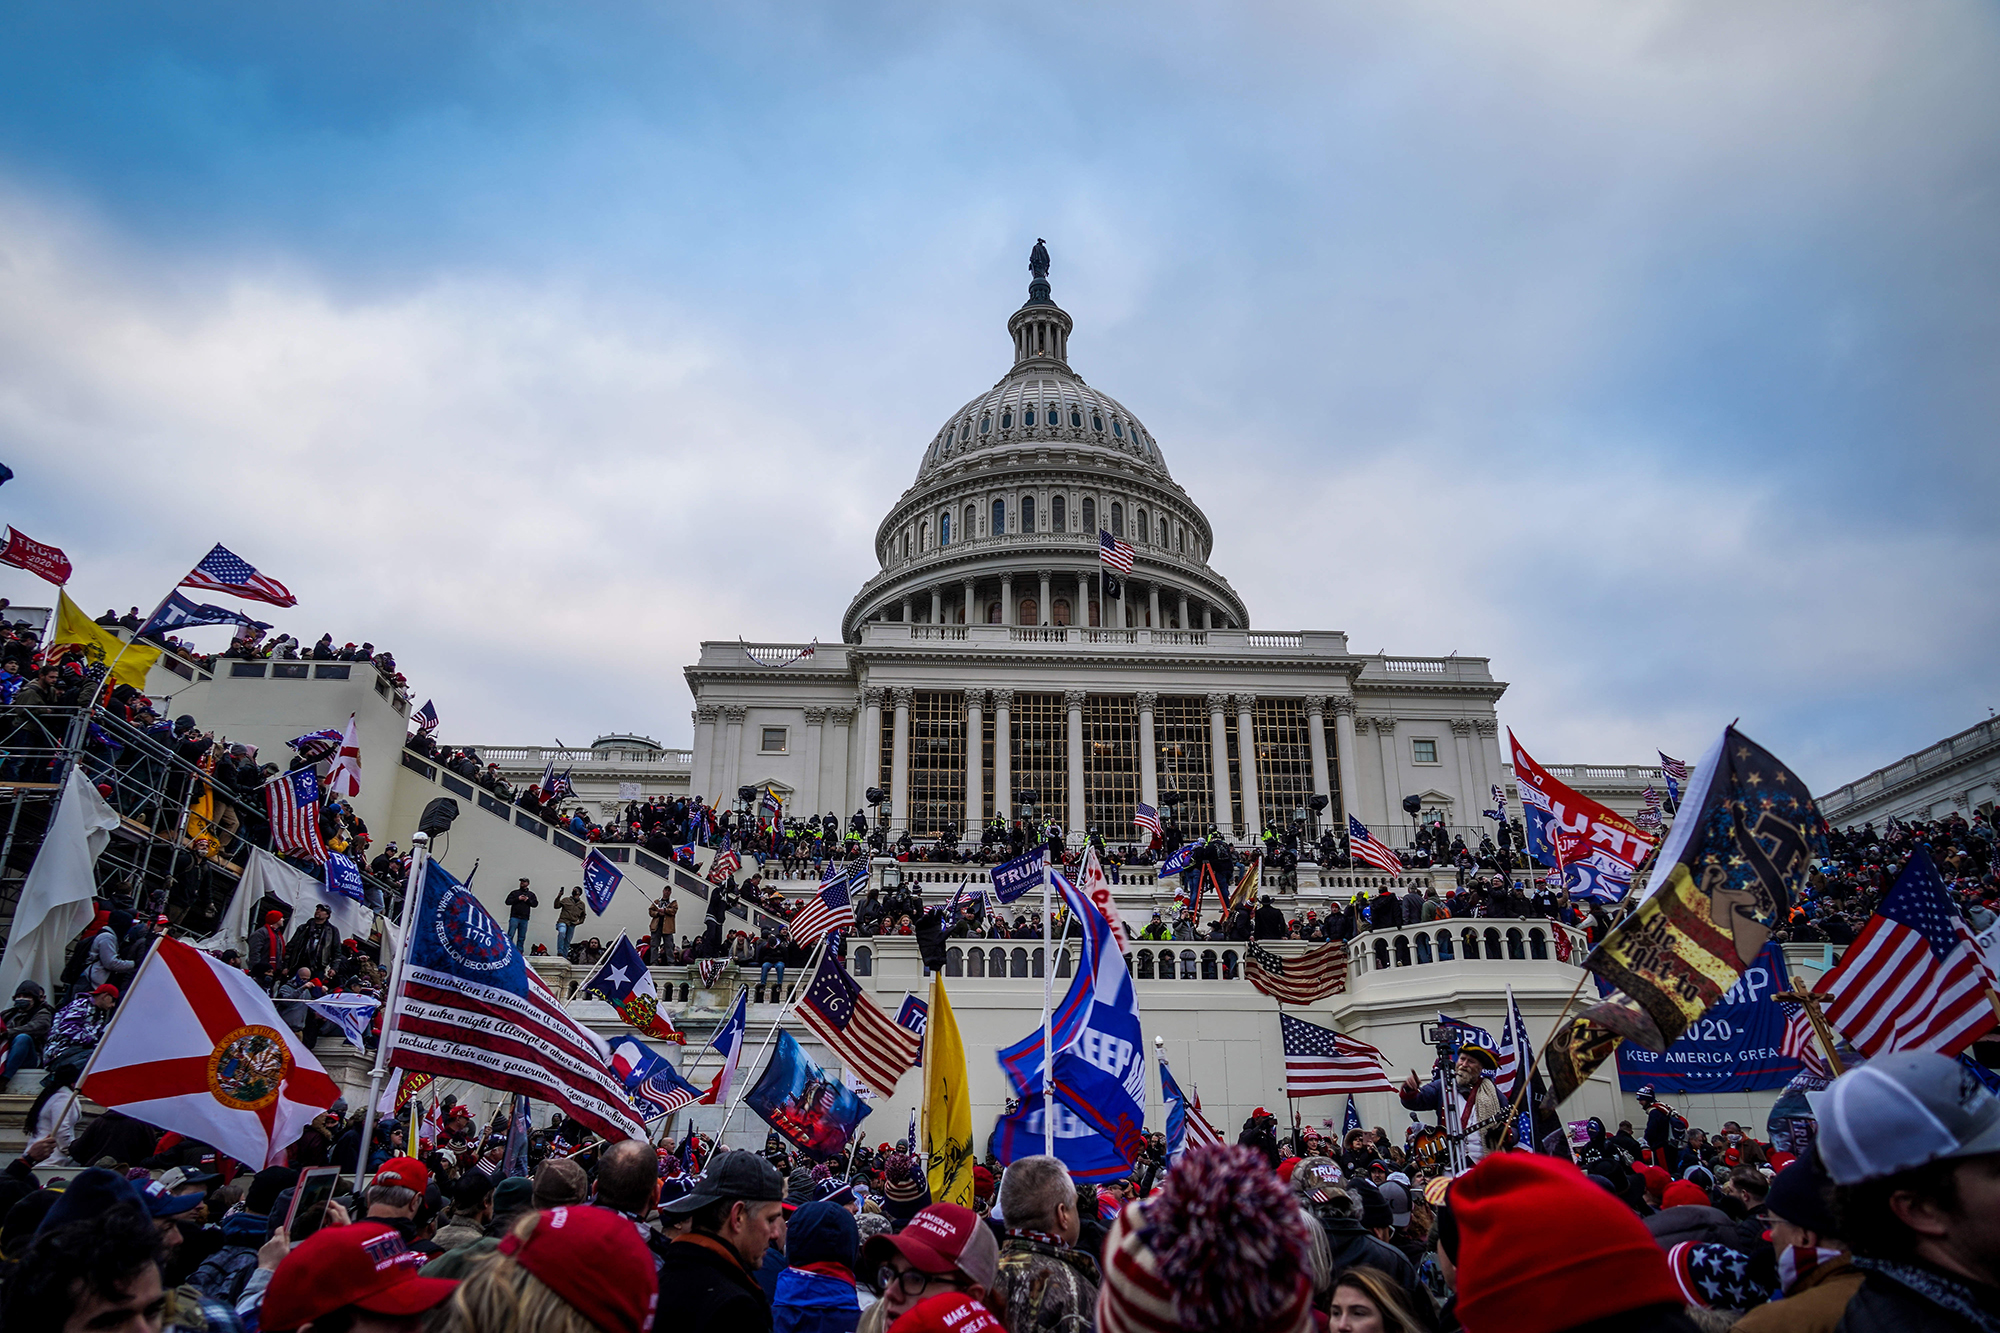 Trump supporters storm the US Capitol building to  to protest the ratification of the then President-elect Joe Biden's Electoral College victory over President Trump in the 2020 election.